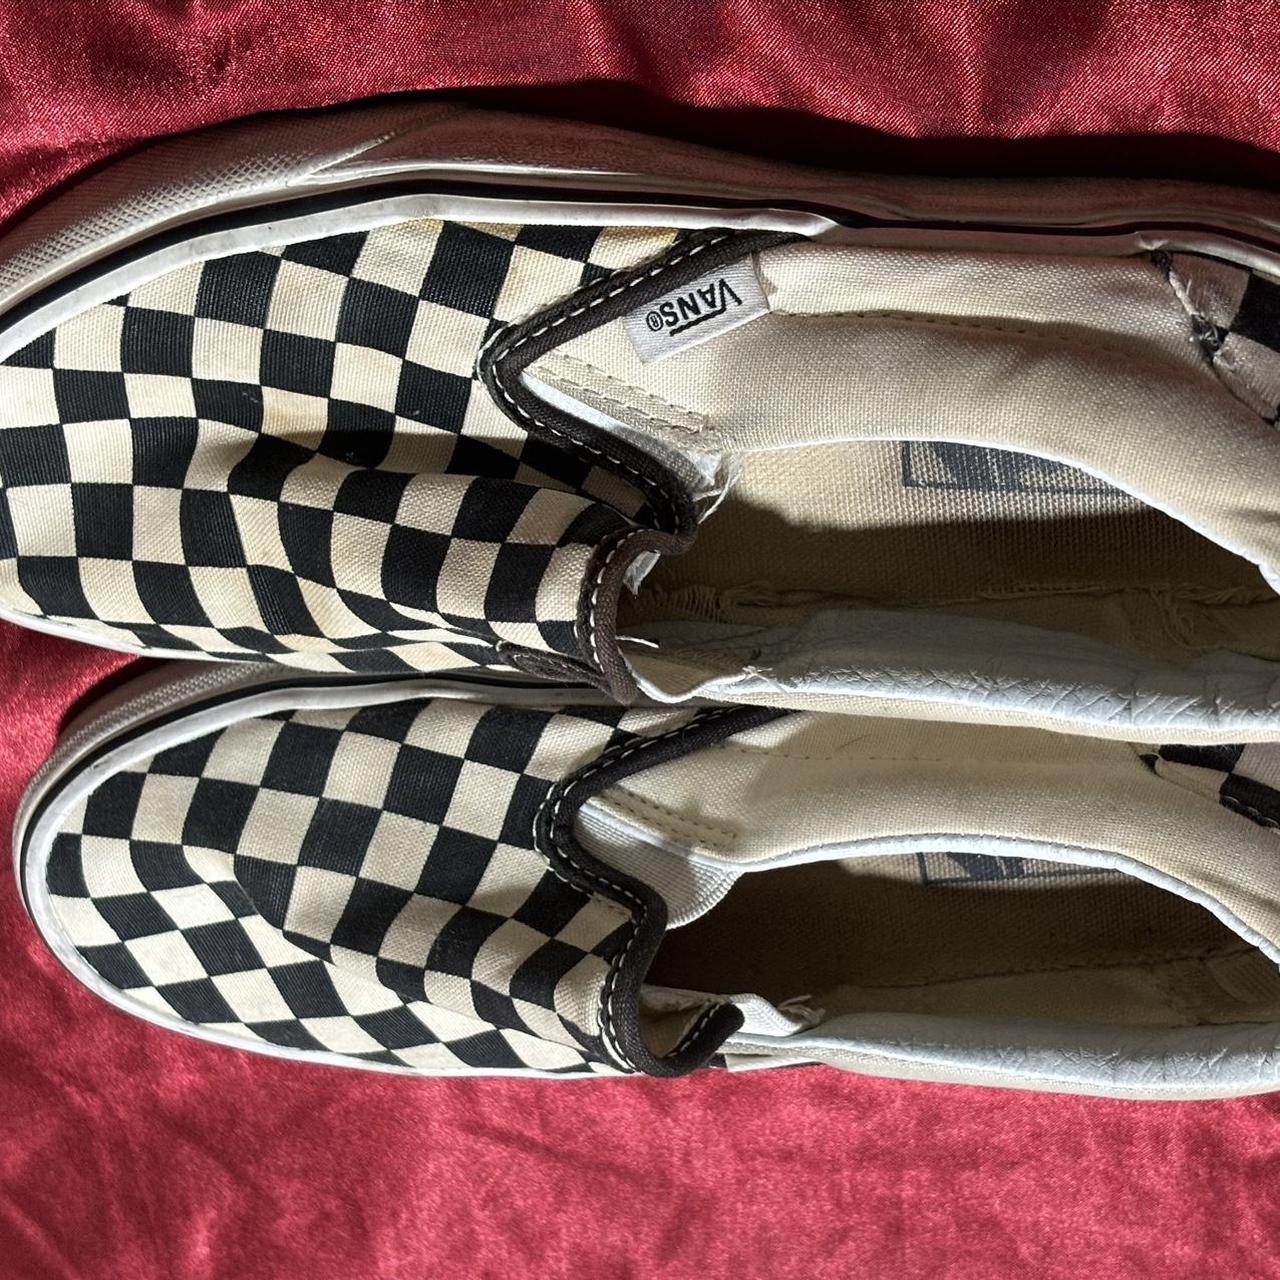 Vans Women's Black and White Trainers (3)